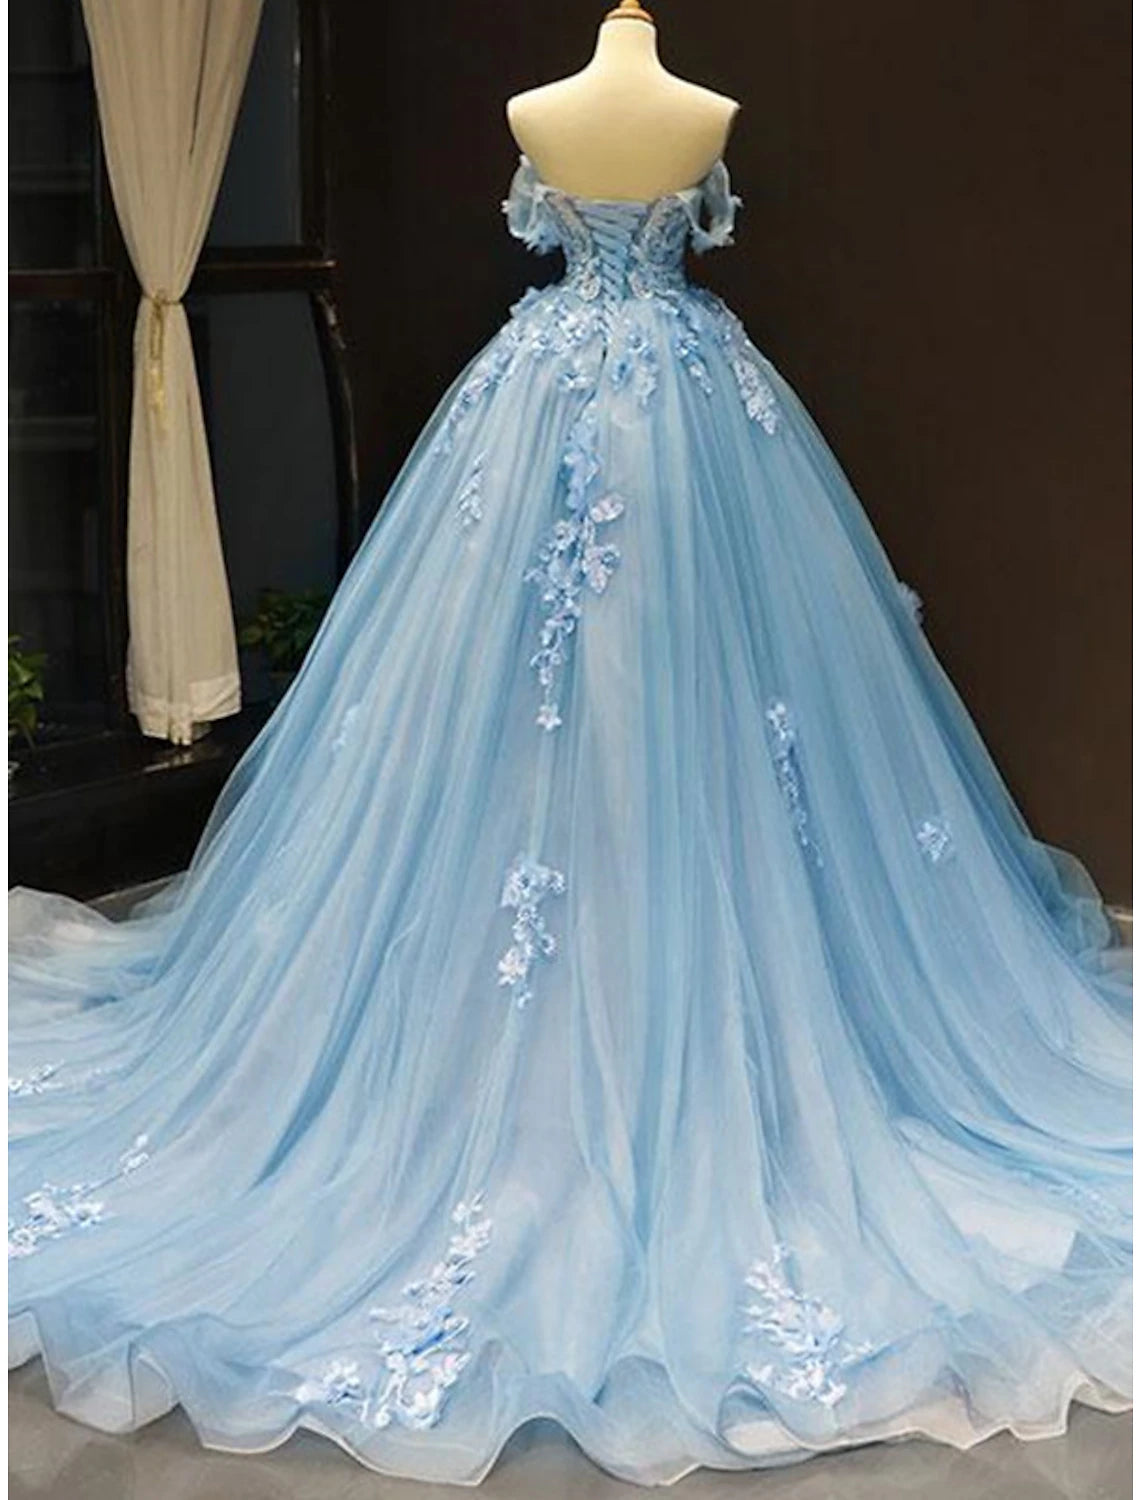 Ball Gown Prom Dresses Floral Wedding Dress Court Train Short Sleeve Sweetheart Lace with Pleats